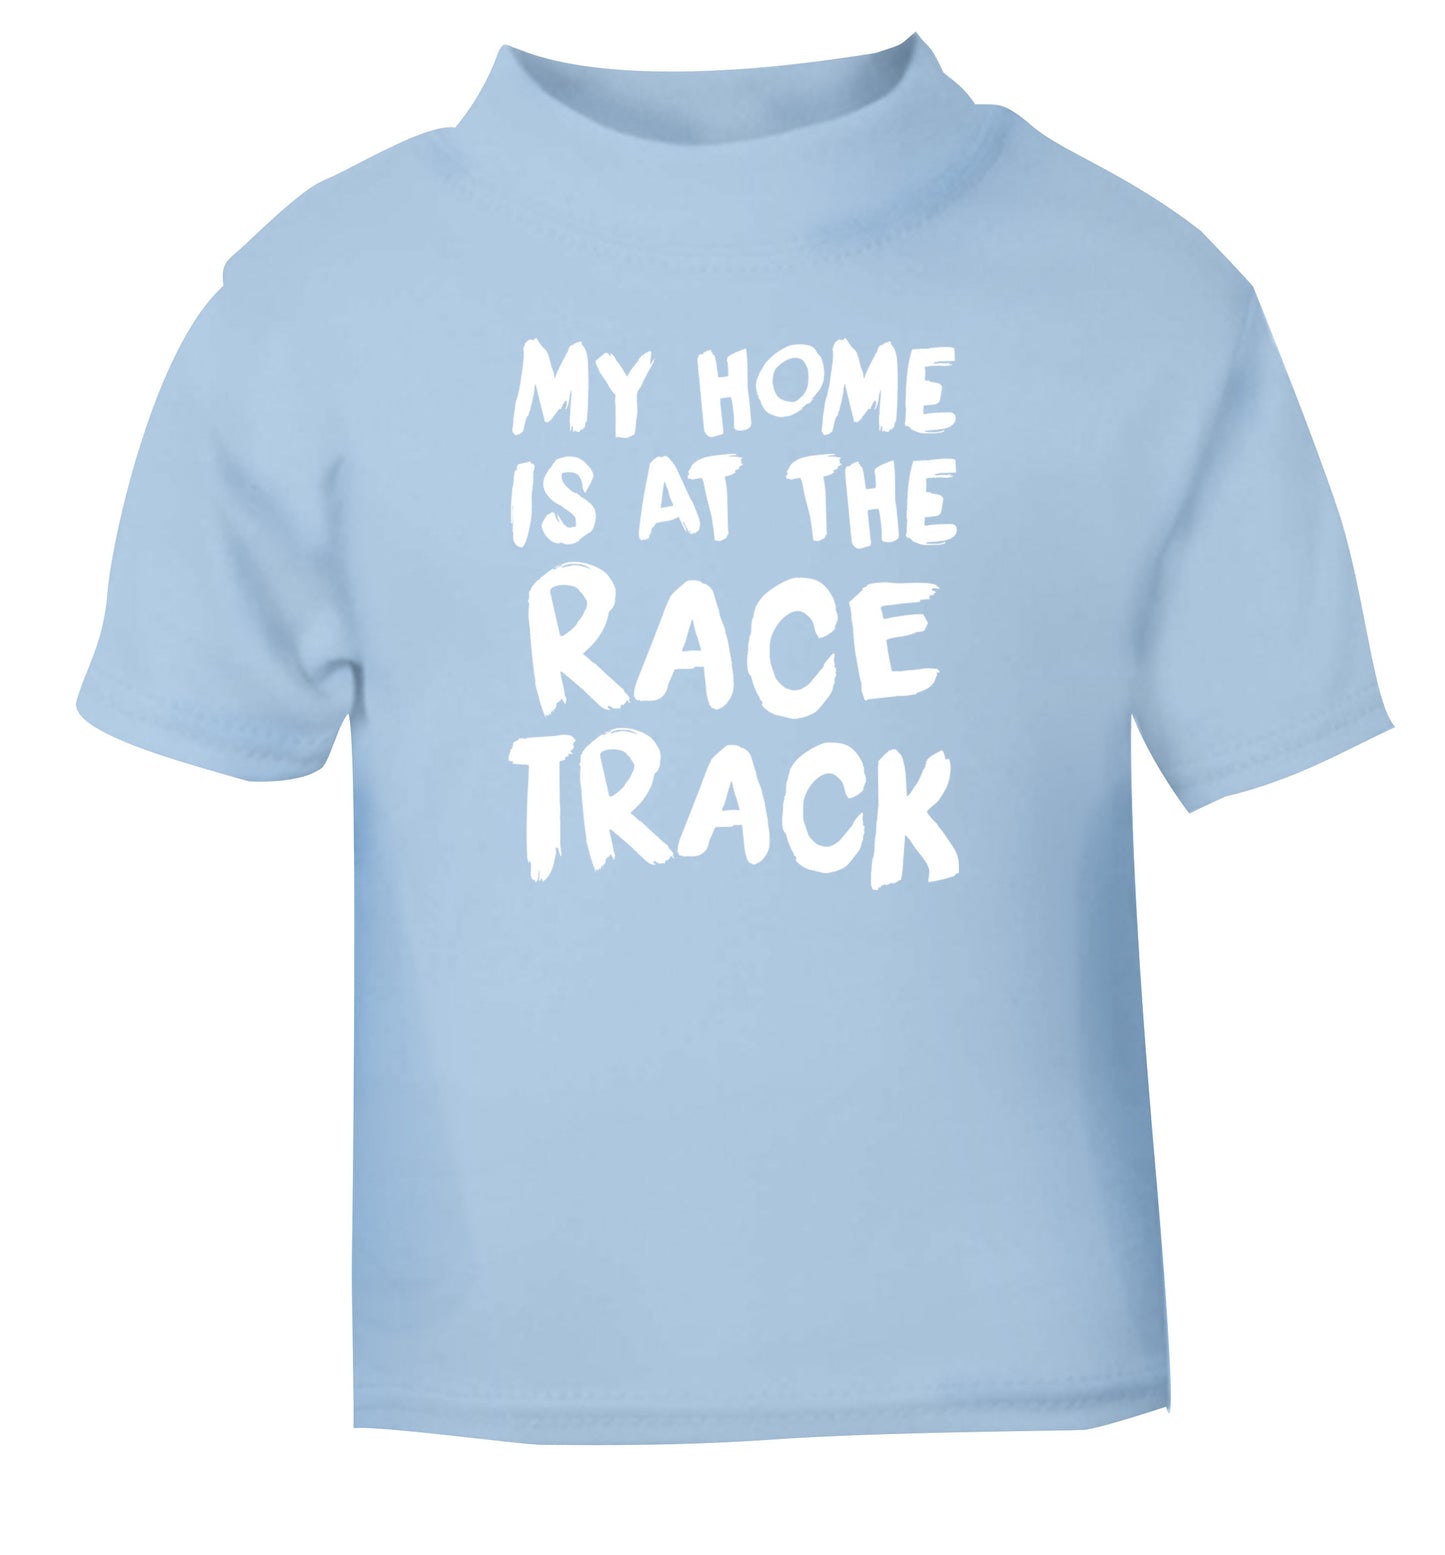 My home is at the race track light blue Baby Toddler Tshirt 2 Years